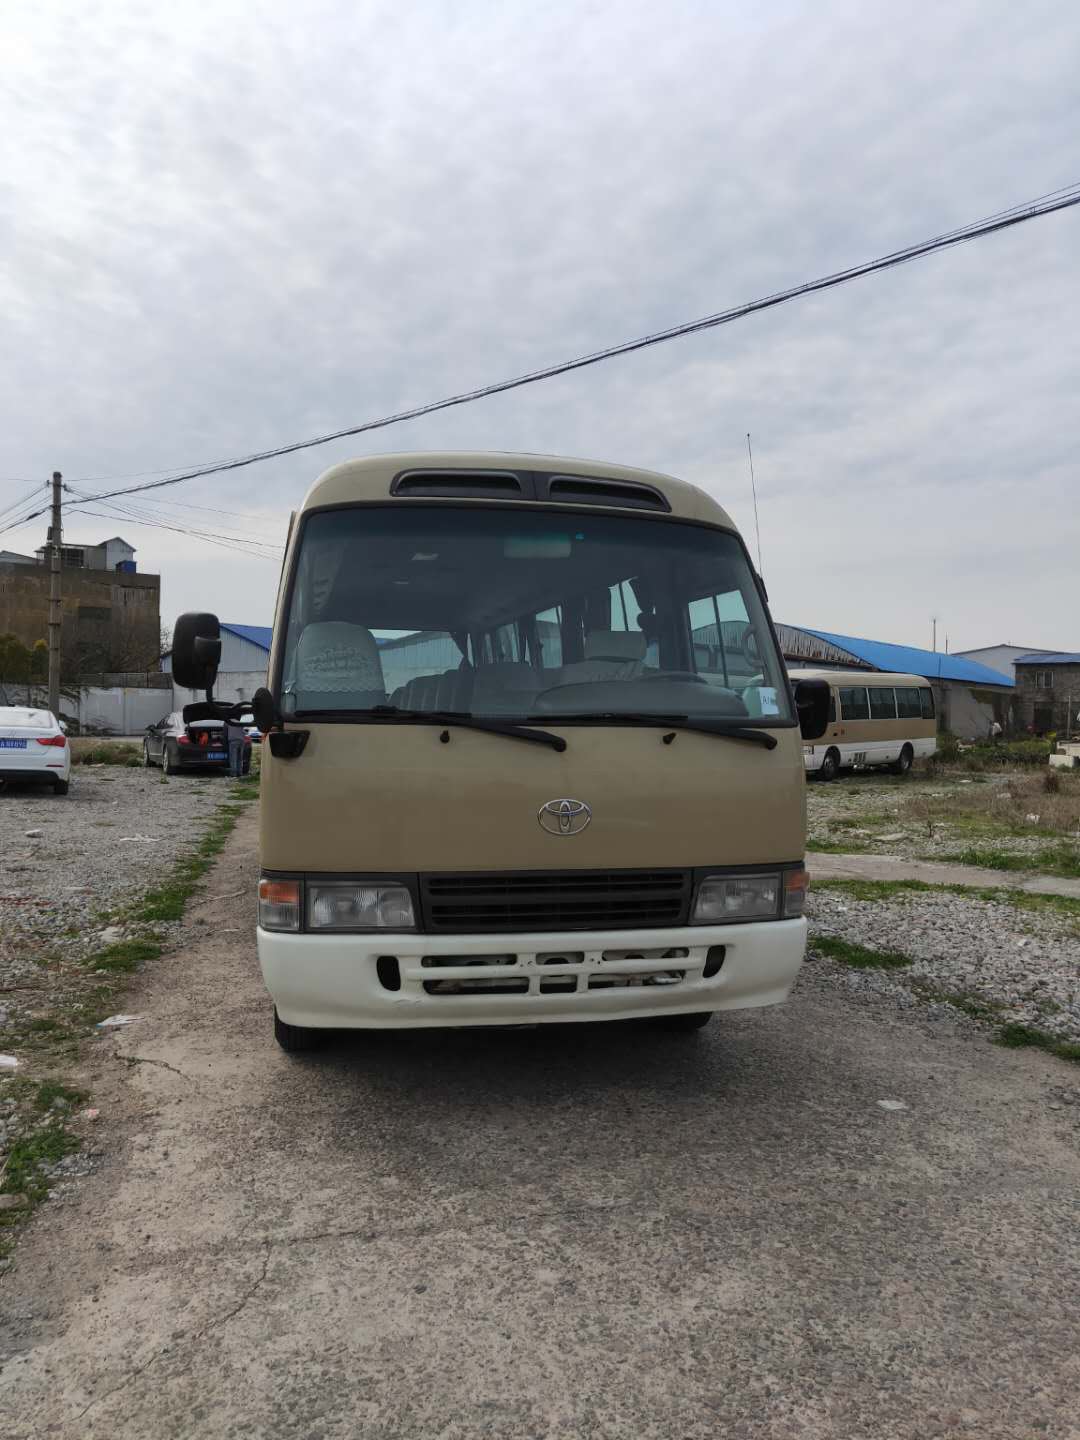 Quality LHD 2016 second hand /used toyota coaster mini coach for sale with 30 seats wholesale